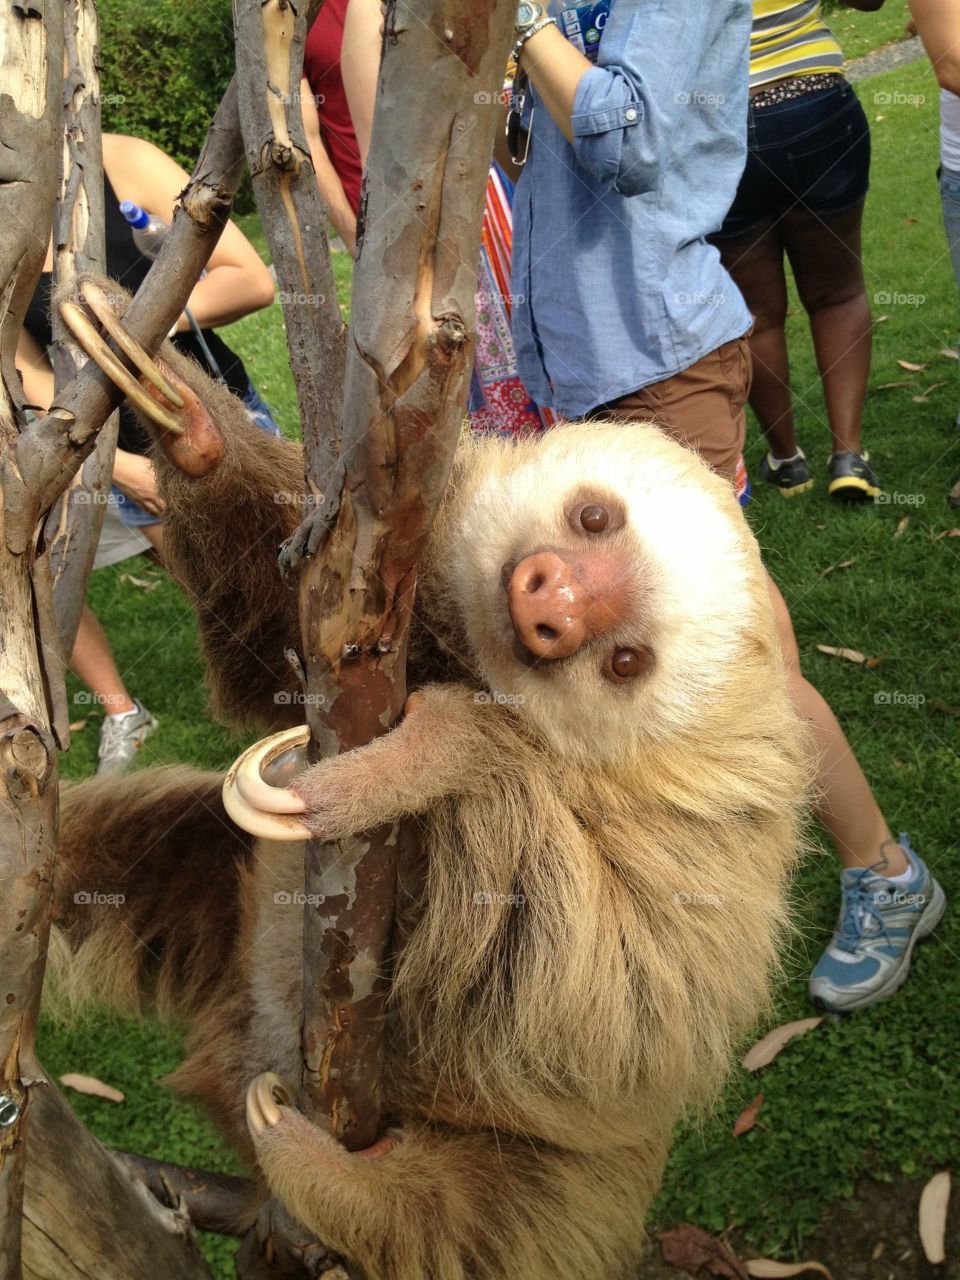 Sloth at Toucan Rescue Ranch in Costa Rica